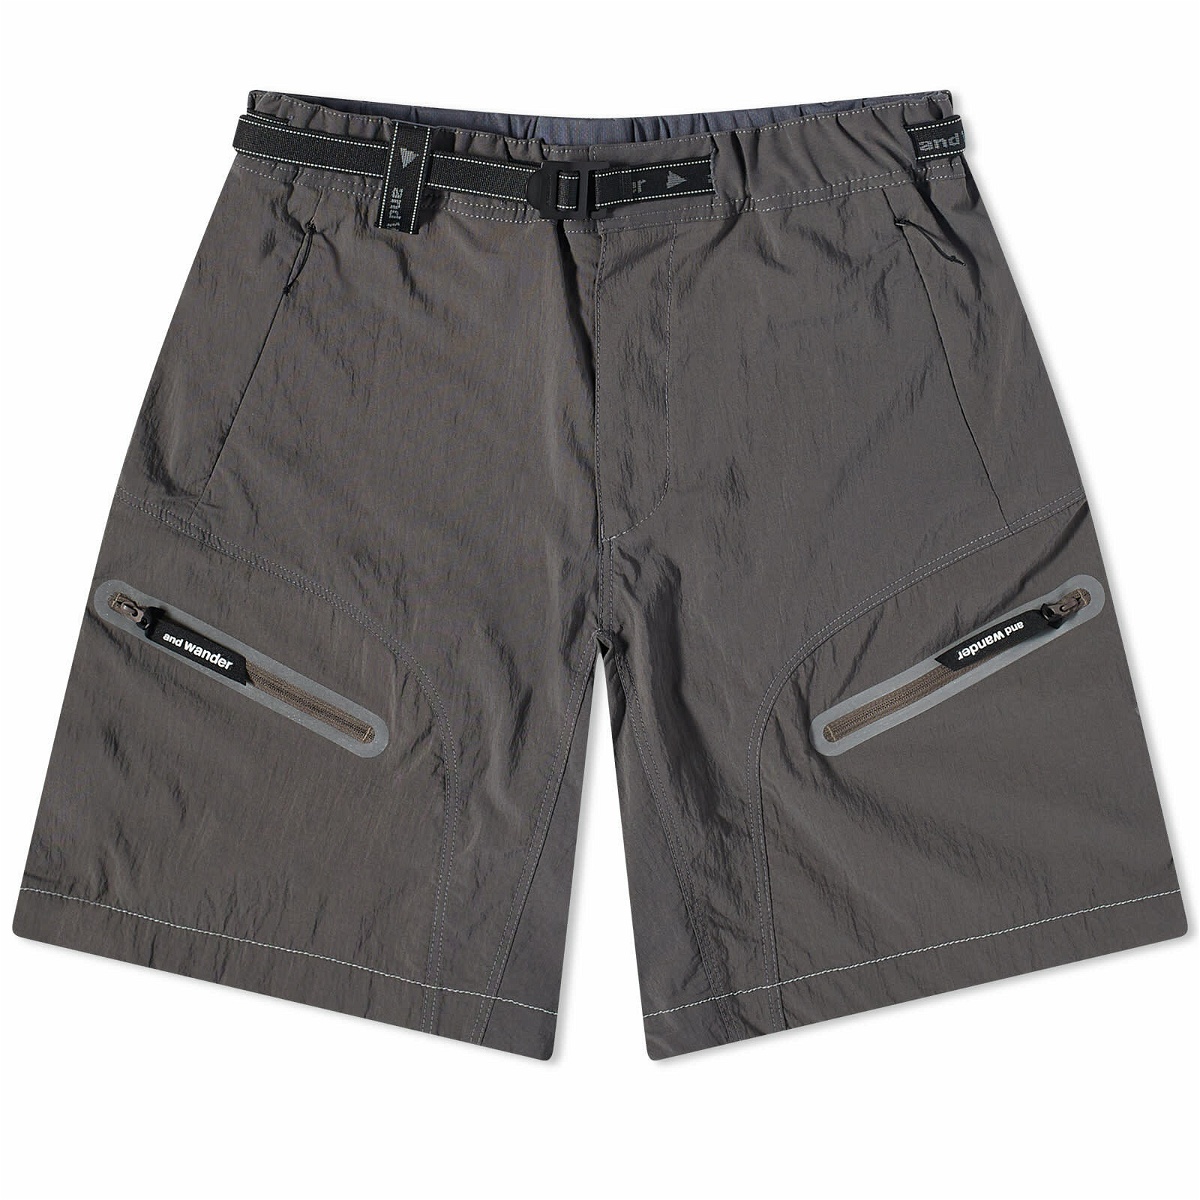 And Wander Men's Light Hike Short in Charcoal and Wander